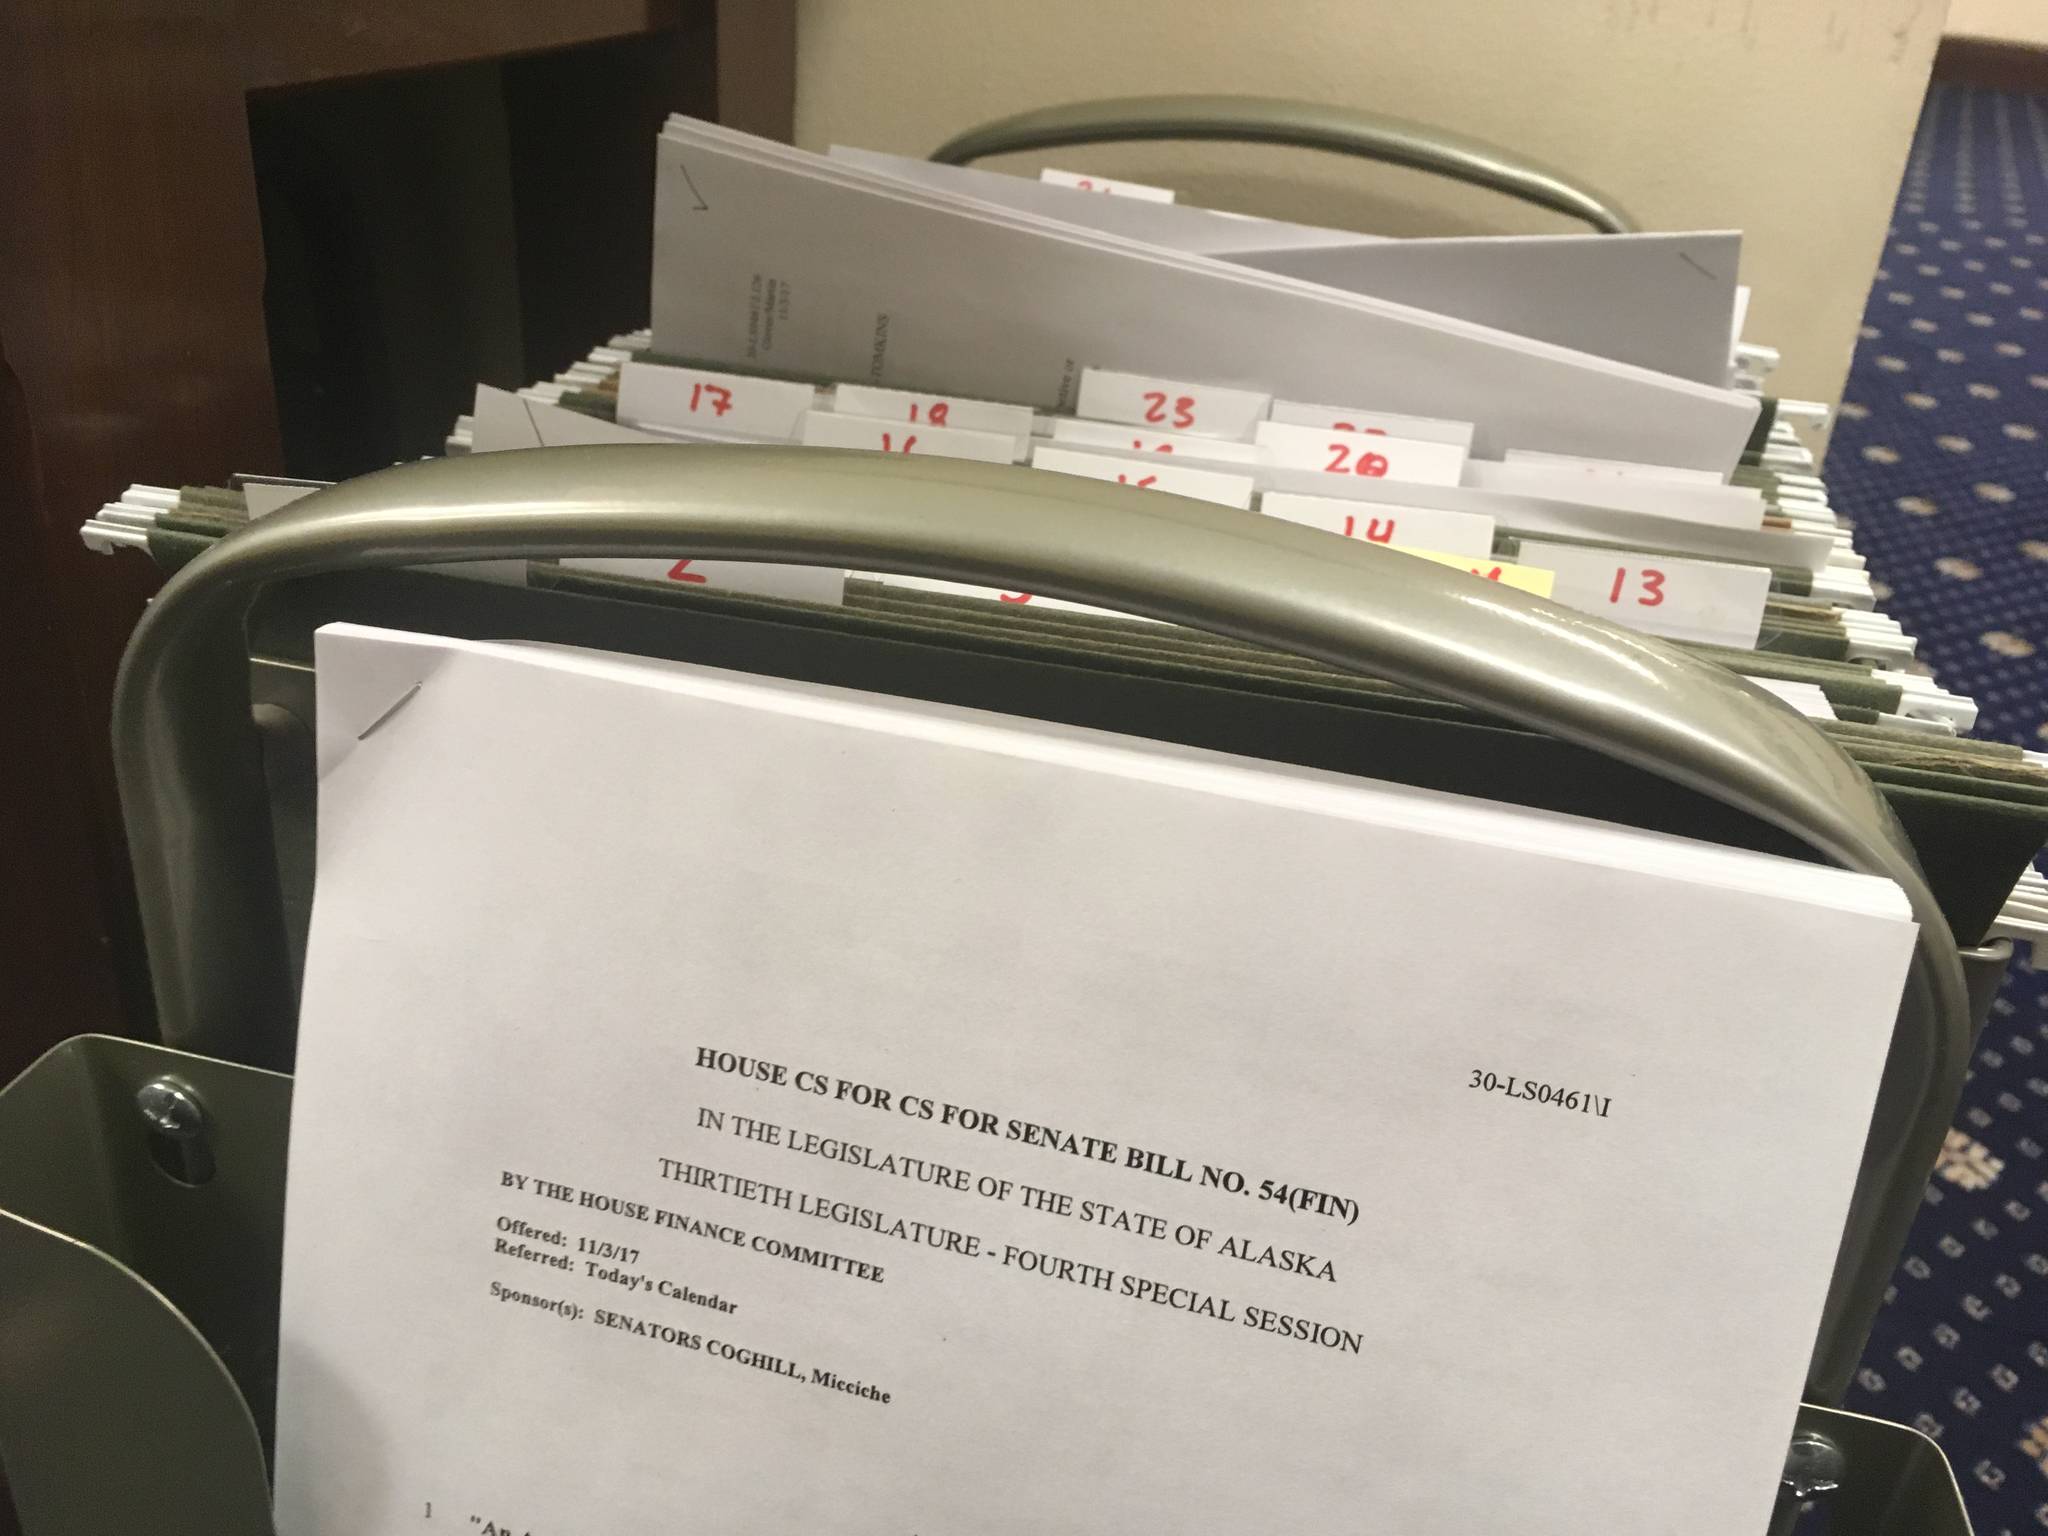 A file cart is seen packed with amendments outside the House Chambers on Wednesday, Nov. 8, 2017 in the Alaska State Capitol. (James Brooks | Juneau Empire)